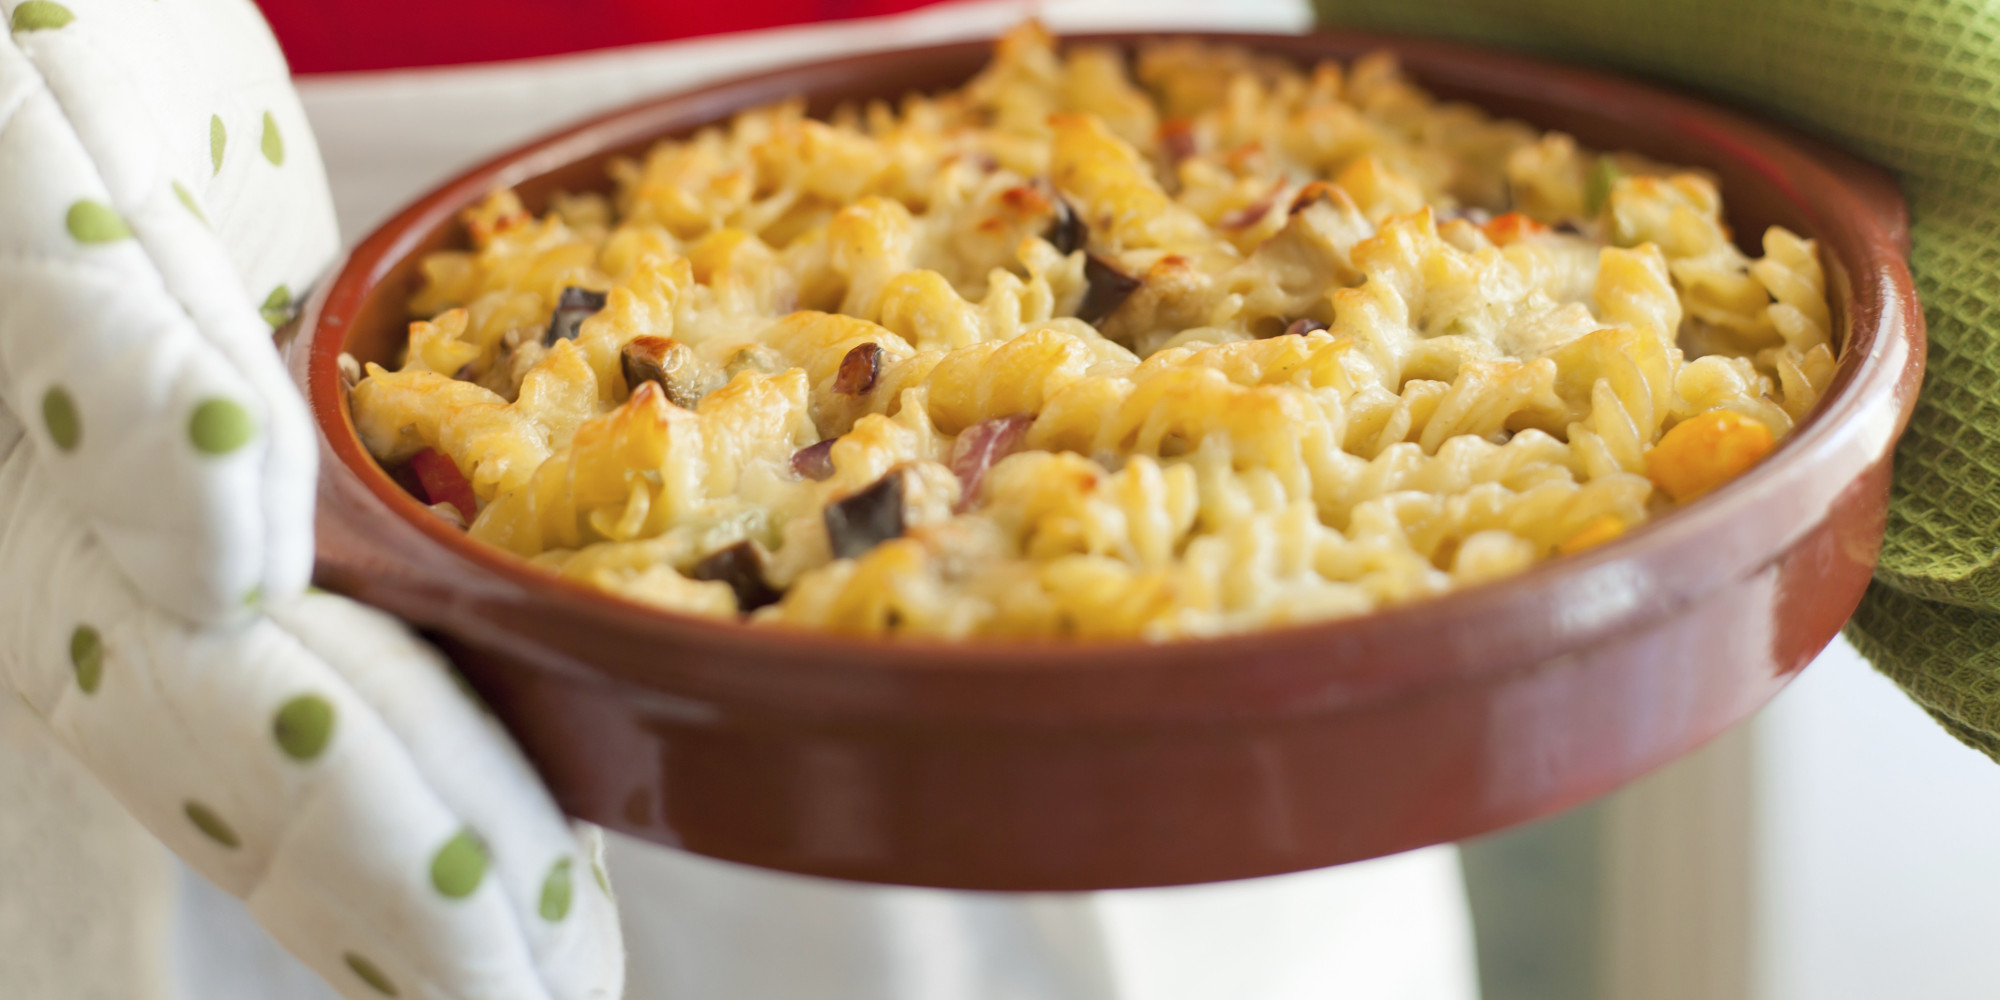 Amazing Baked Pasta Recipe with Broccoli and White Sauce - Huffington Post